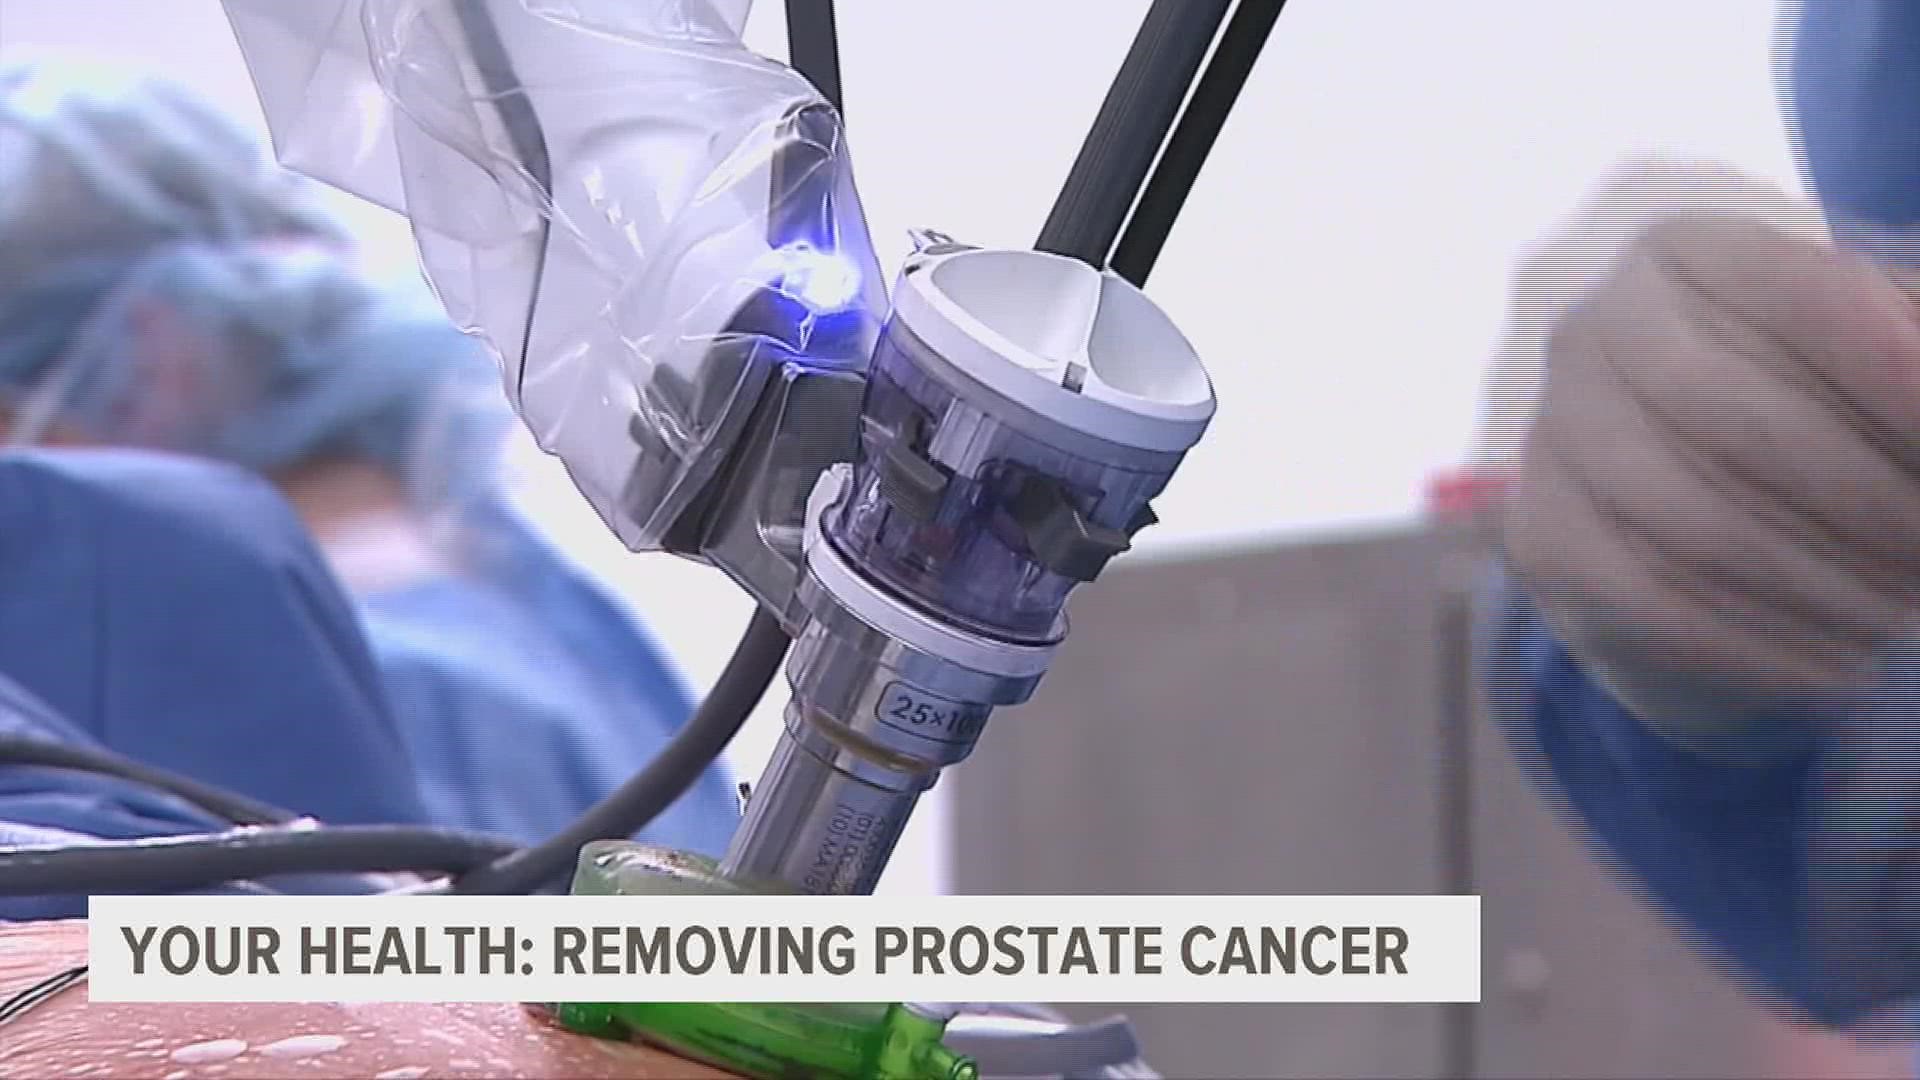 Surgeons are performing a first-of-its-kind surgery – safely removing cancer in the prostate through the bladder.